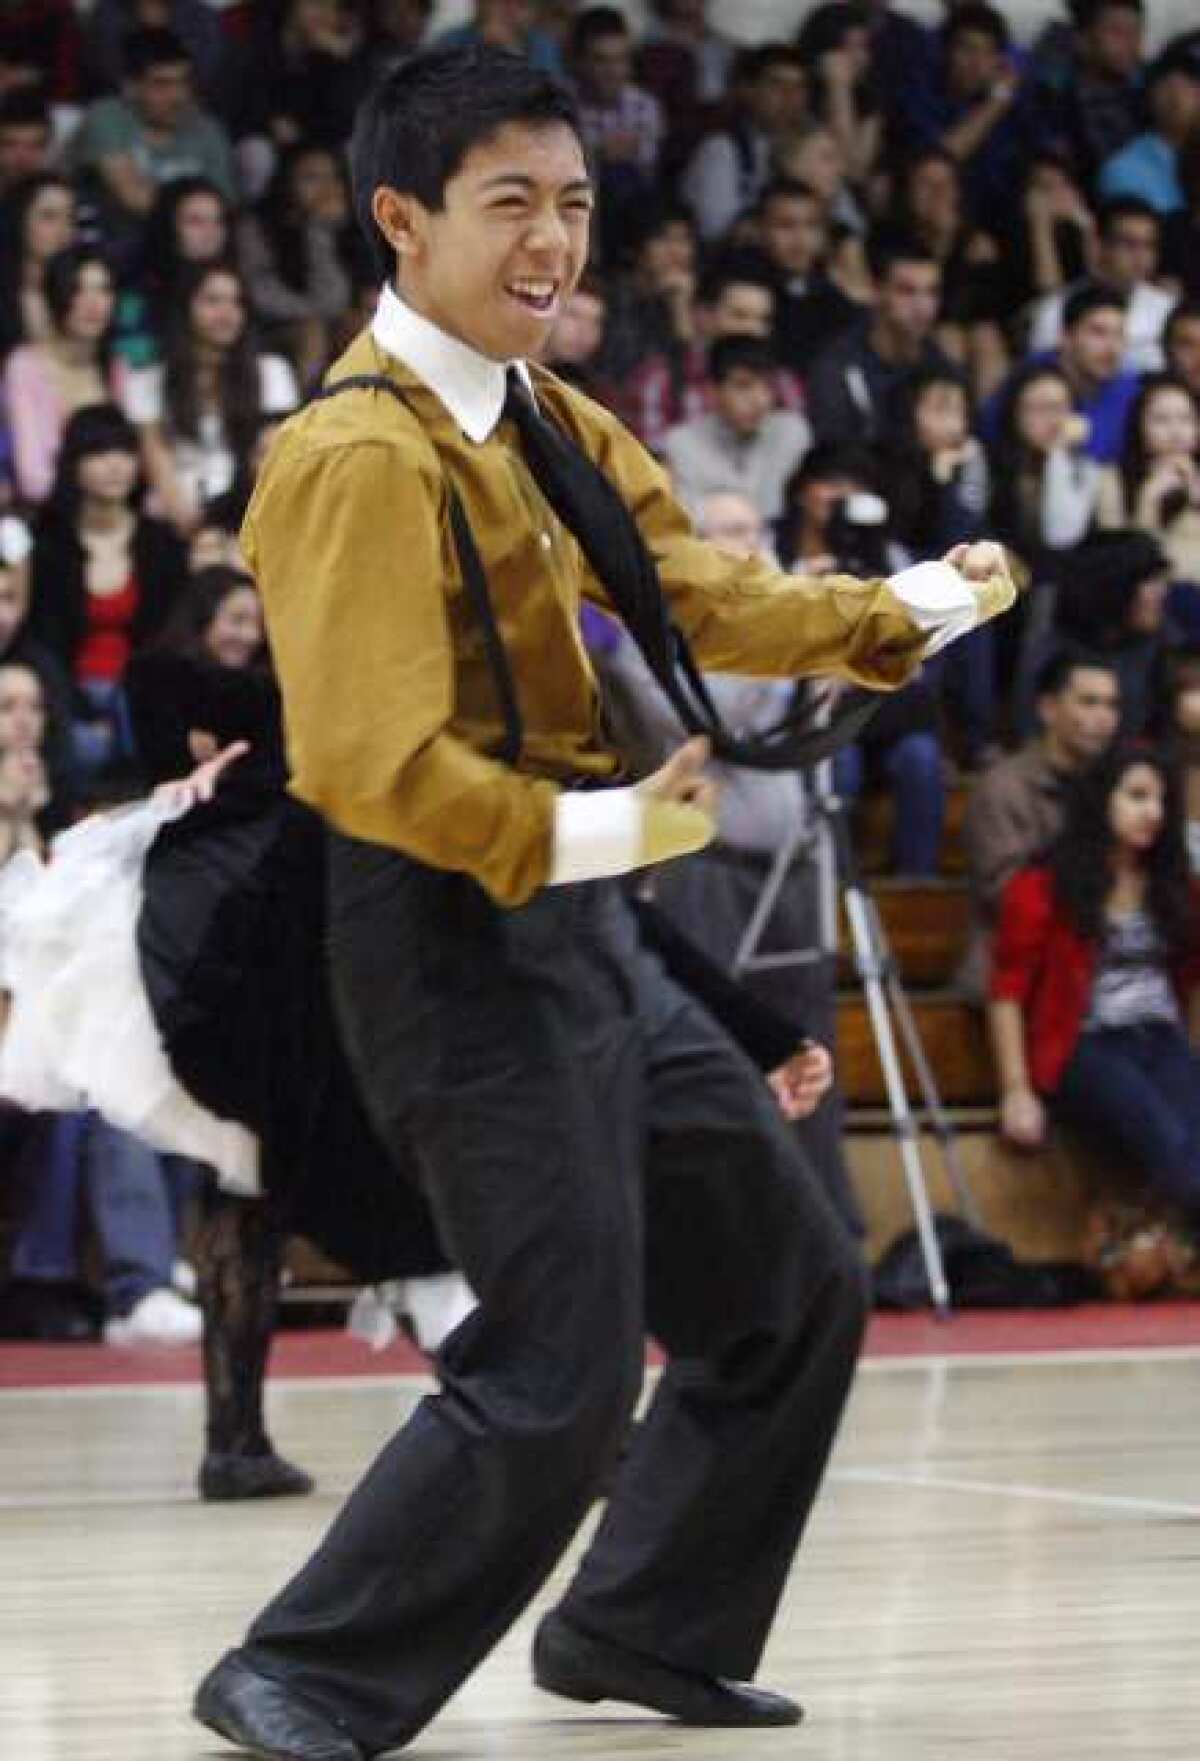 Glendale's Jason Te performs during their spirit assembly, which took place at Glendale High School on Friday. The Varsity Girls and Junior Varsity Girls won first place awards for both large and small dance routines, for four first-place titles, followed by first place co-ed team performance that got the dance team to the 12th National Title.